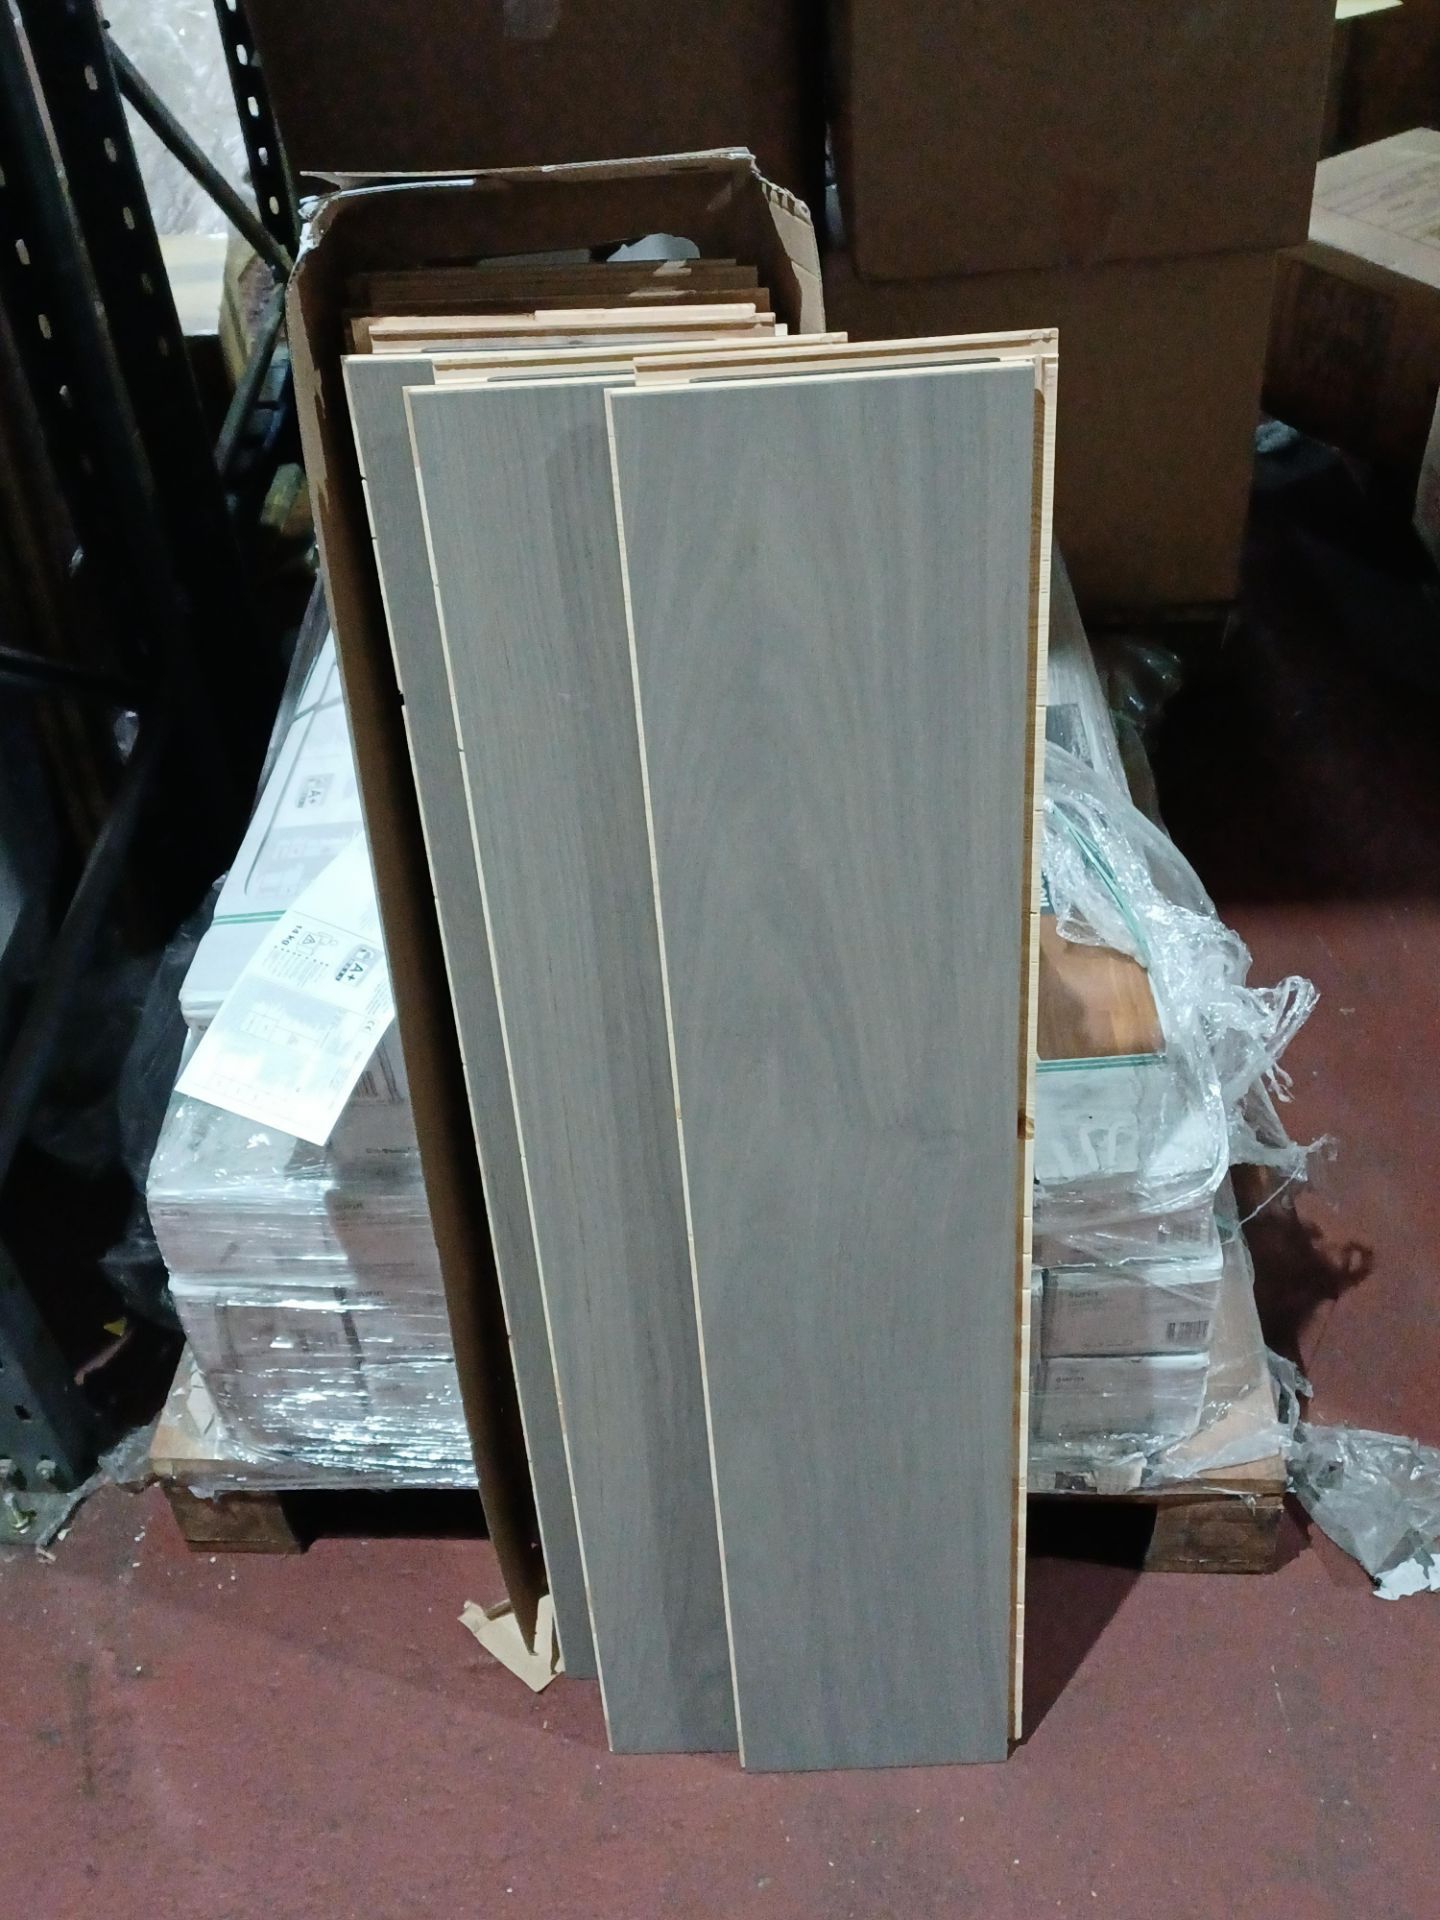 10 PACKS OF Marapi Grey Laminate Flooring, EACH PACK CONTAINS 1.74m2, GIVING THIS LOT A COMBINED - Image 2 of 2